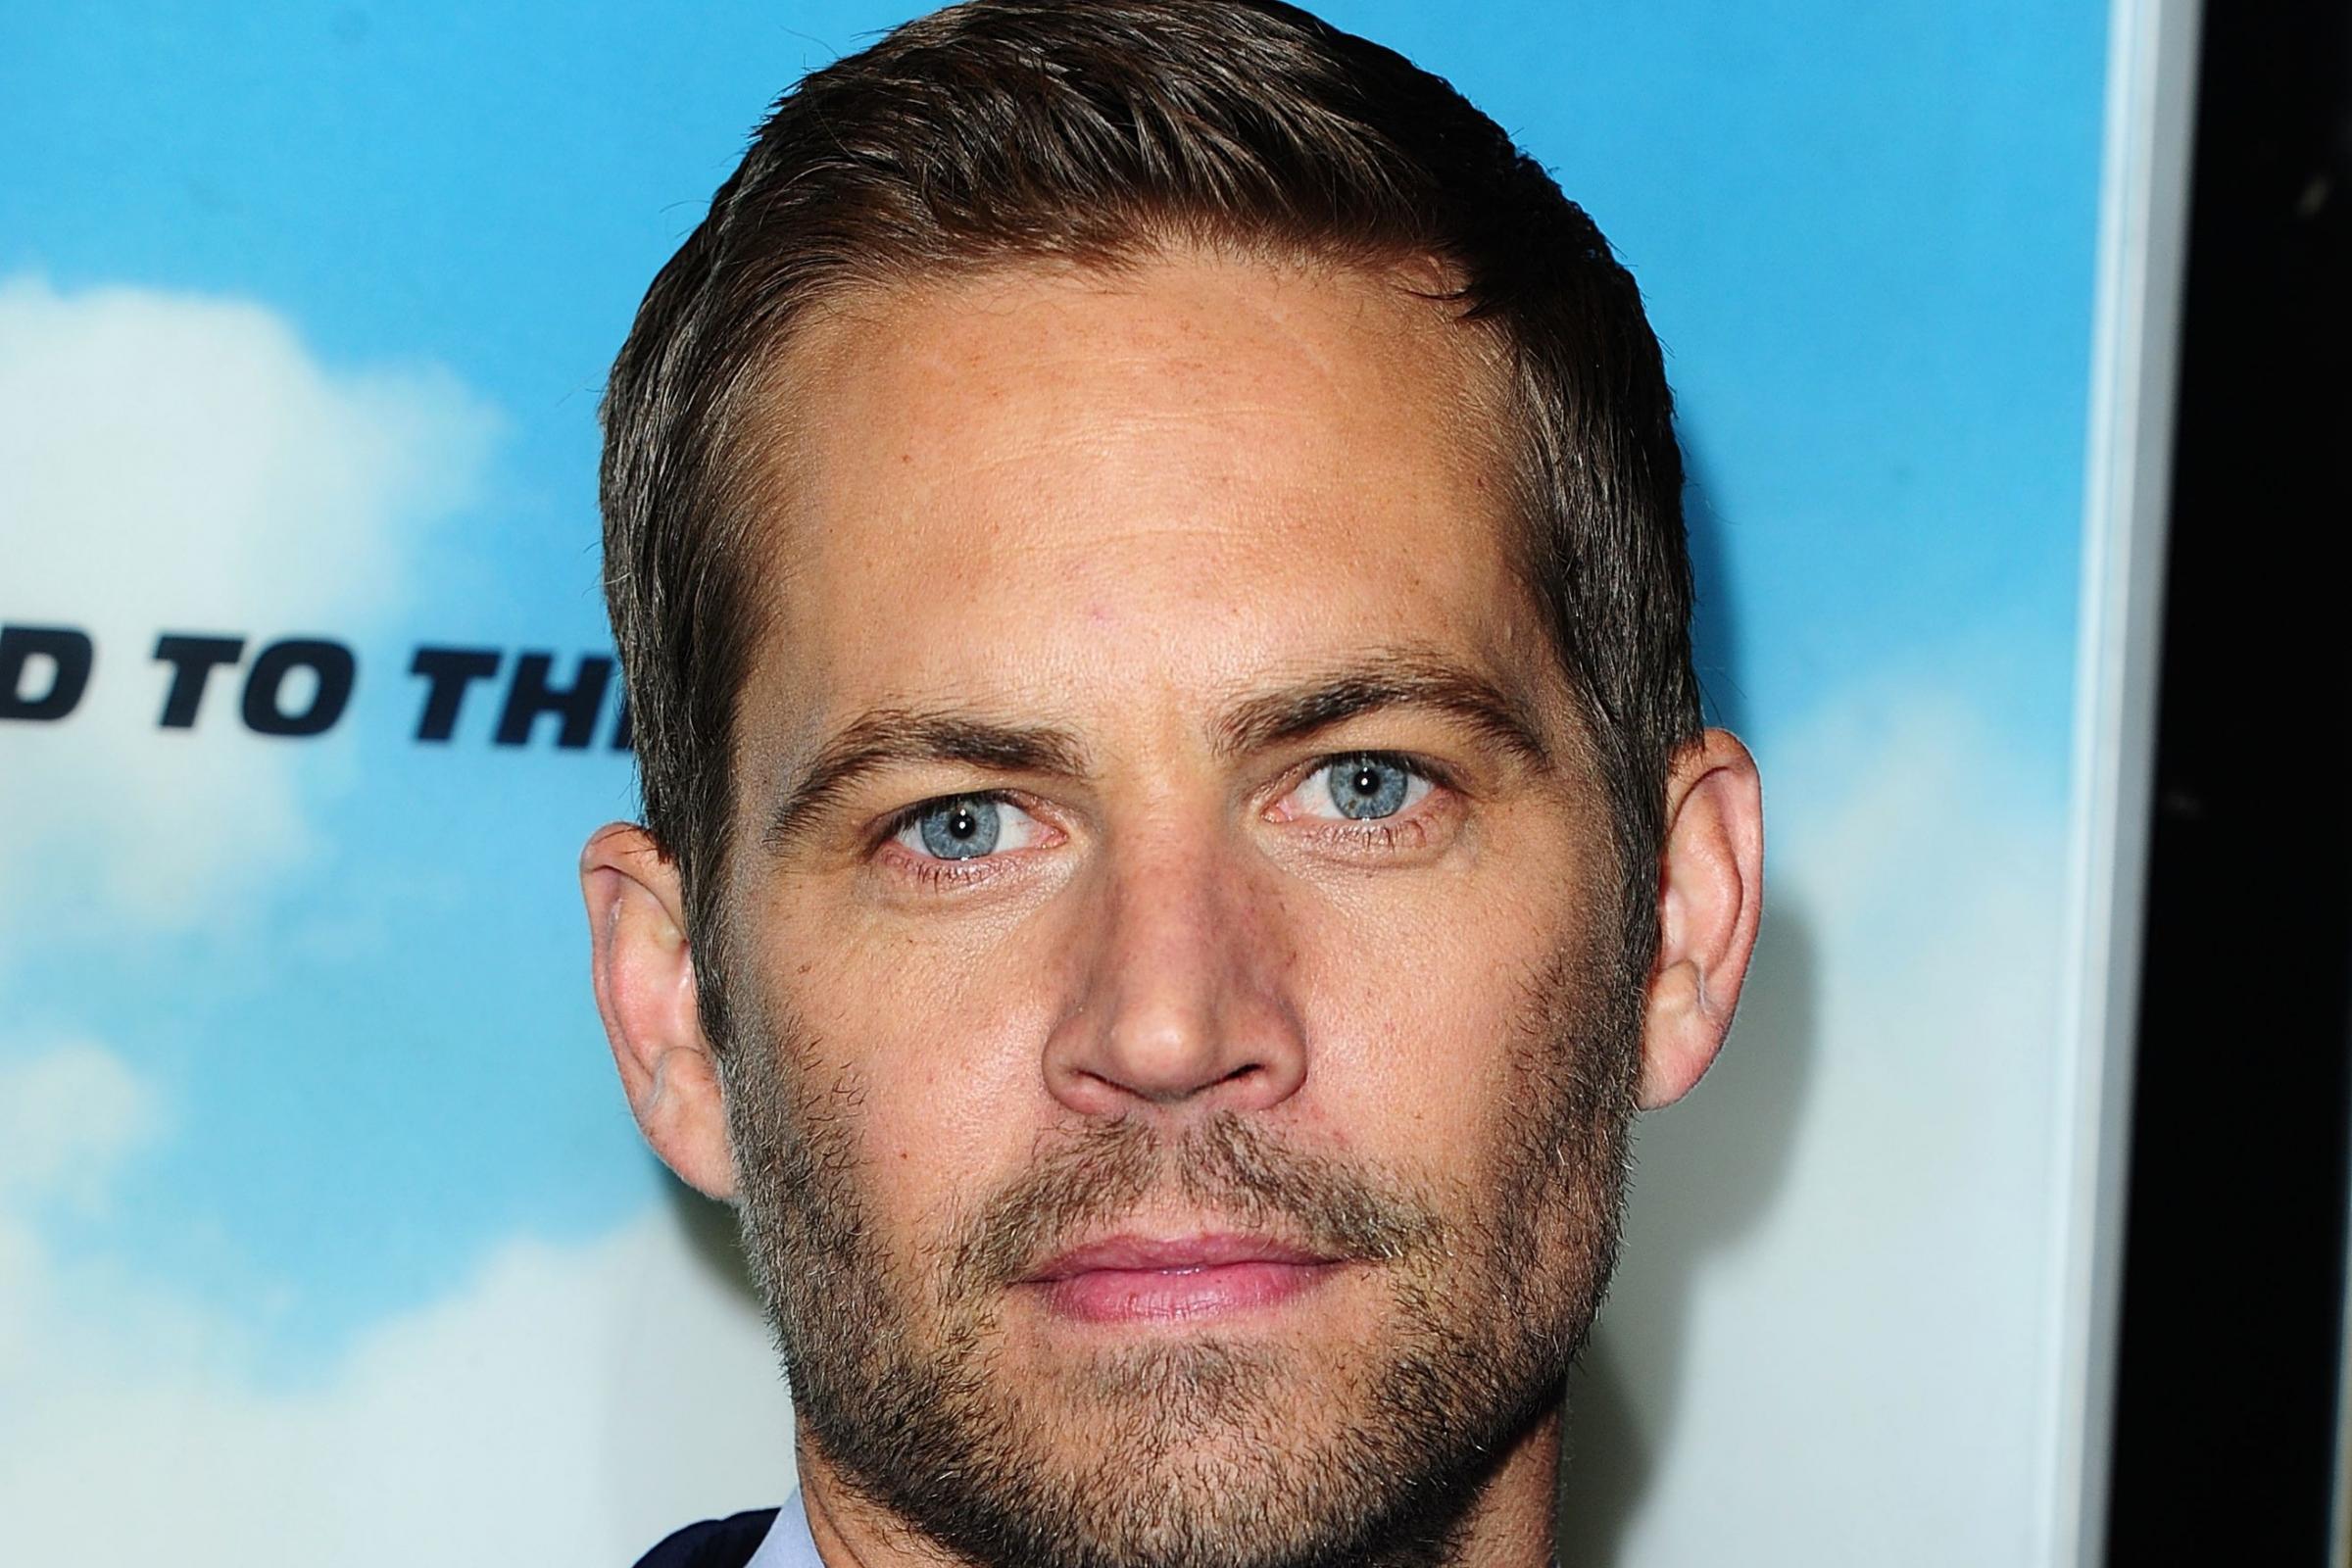 Fast & Furious stars pay tribute to Paul Walker on anniversary of his death